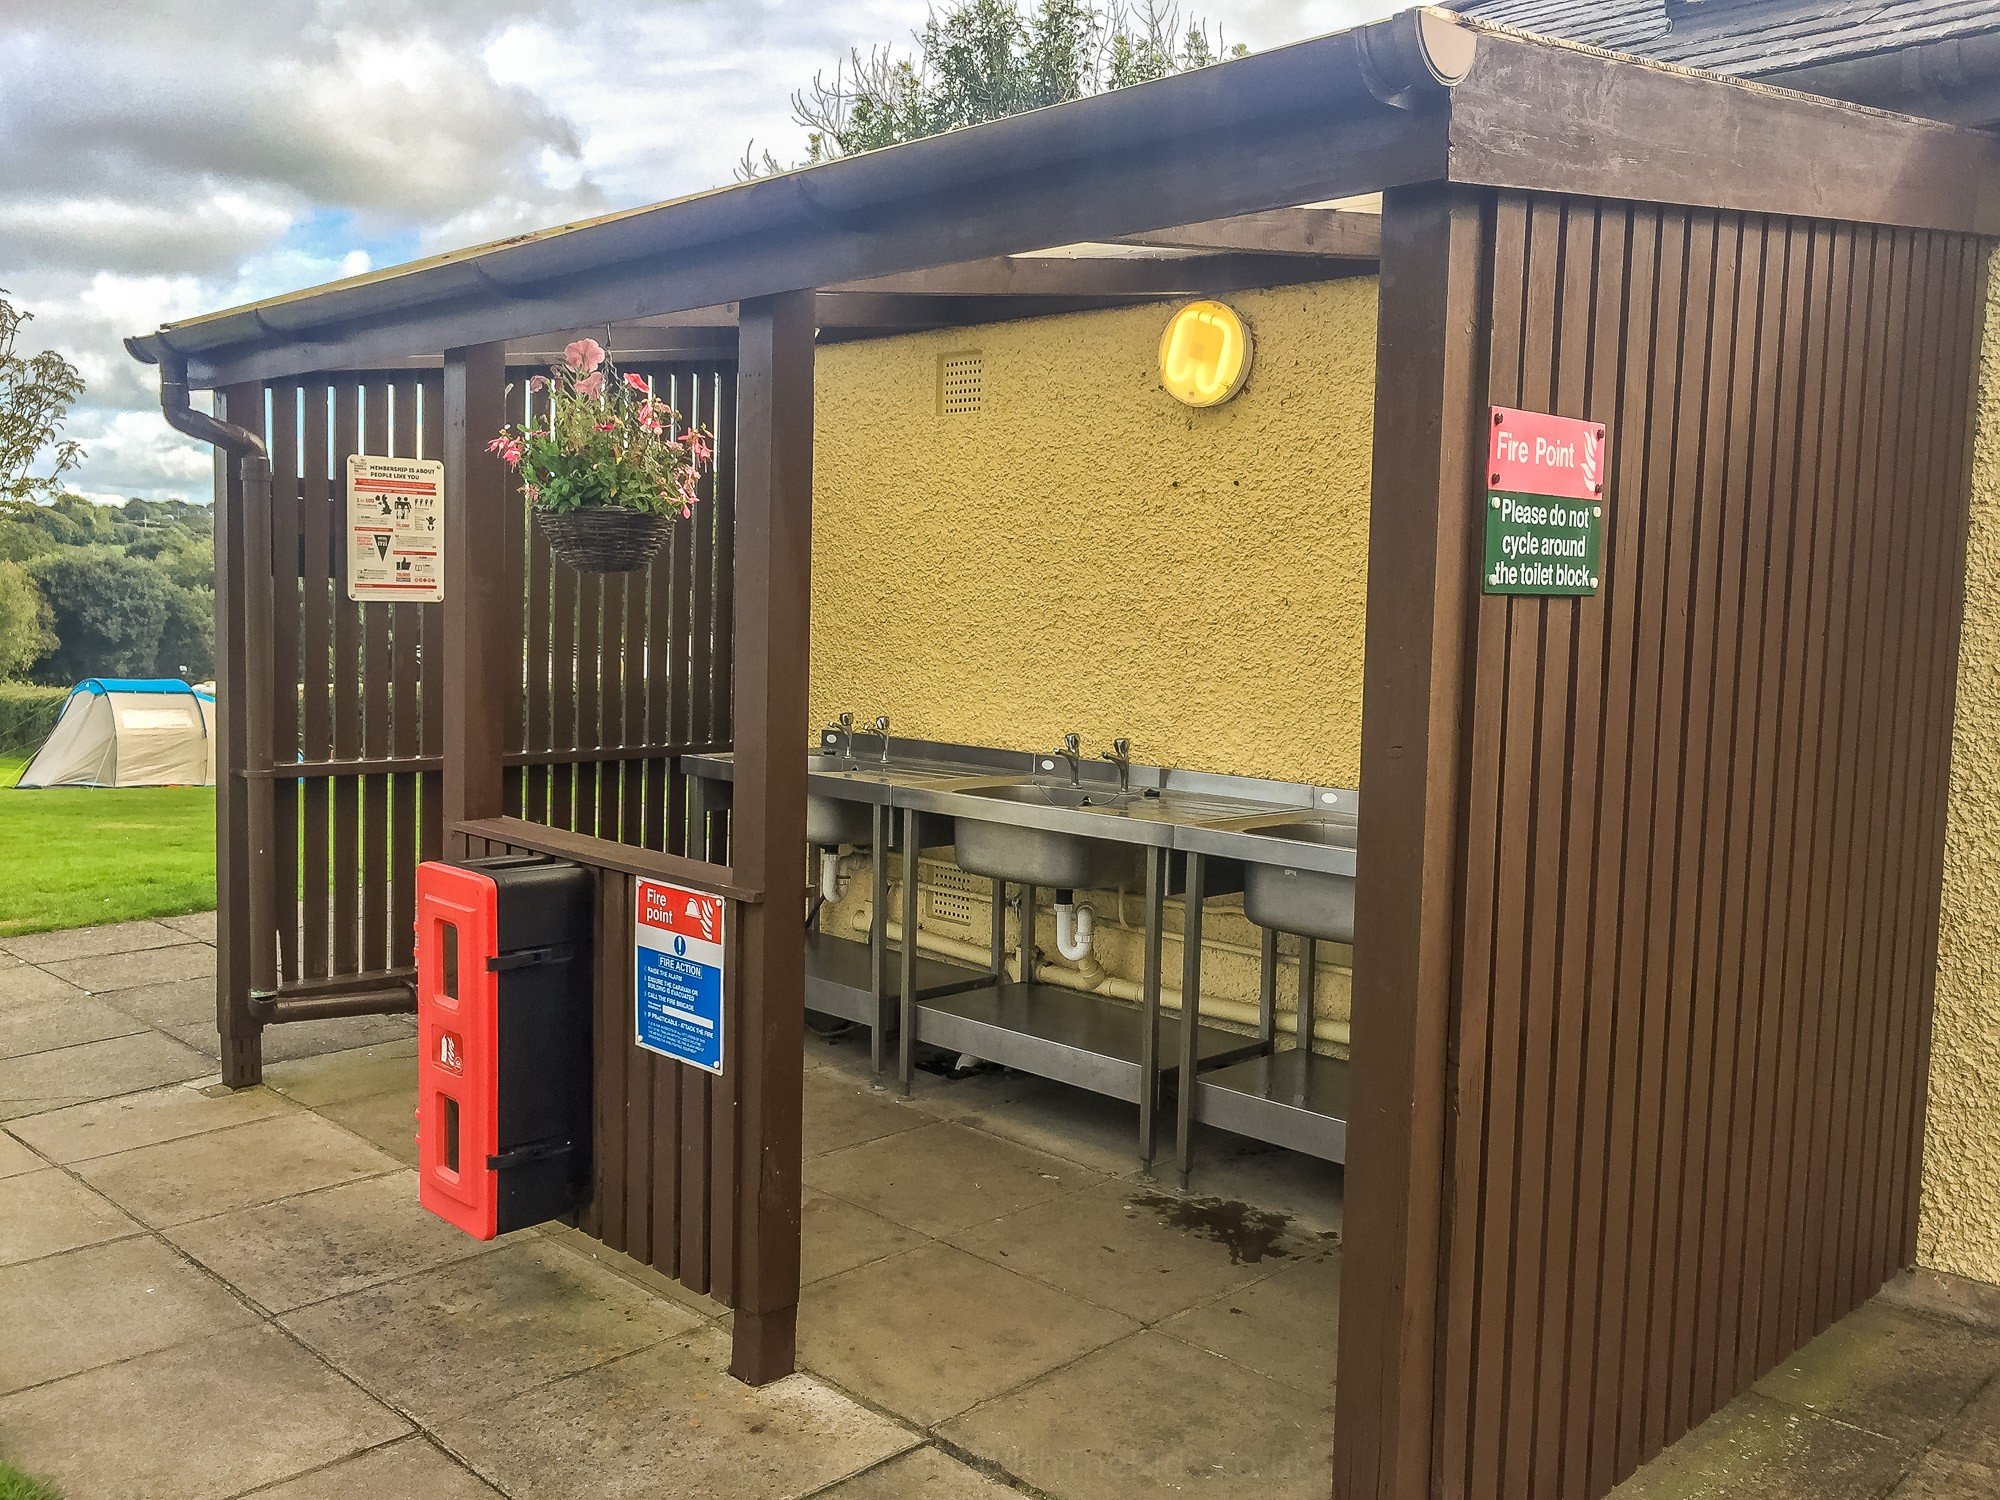 The outside washing up facilities